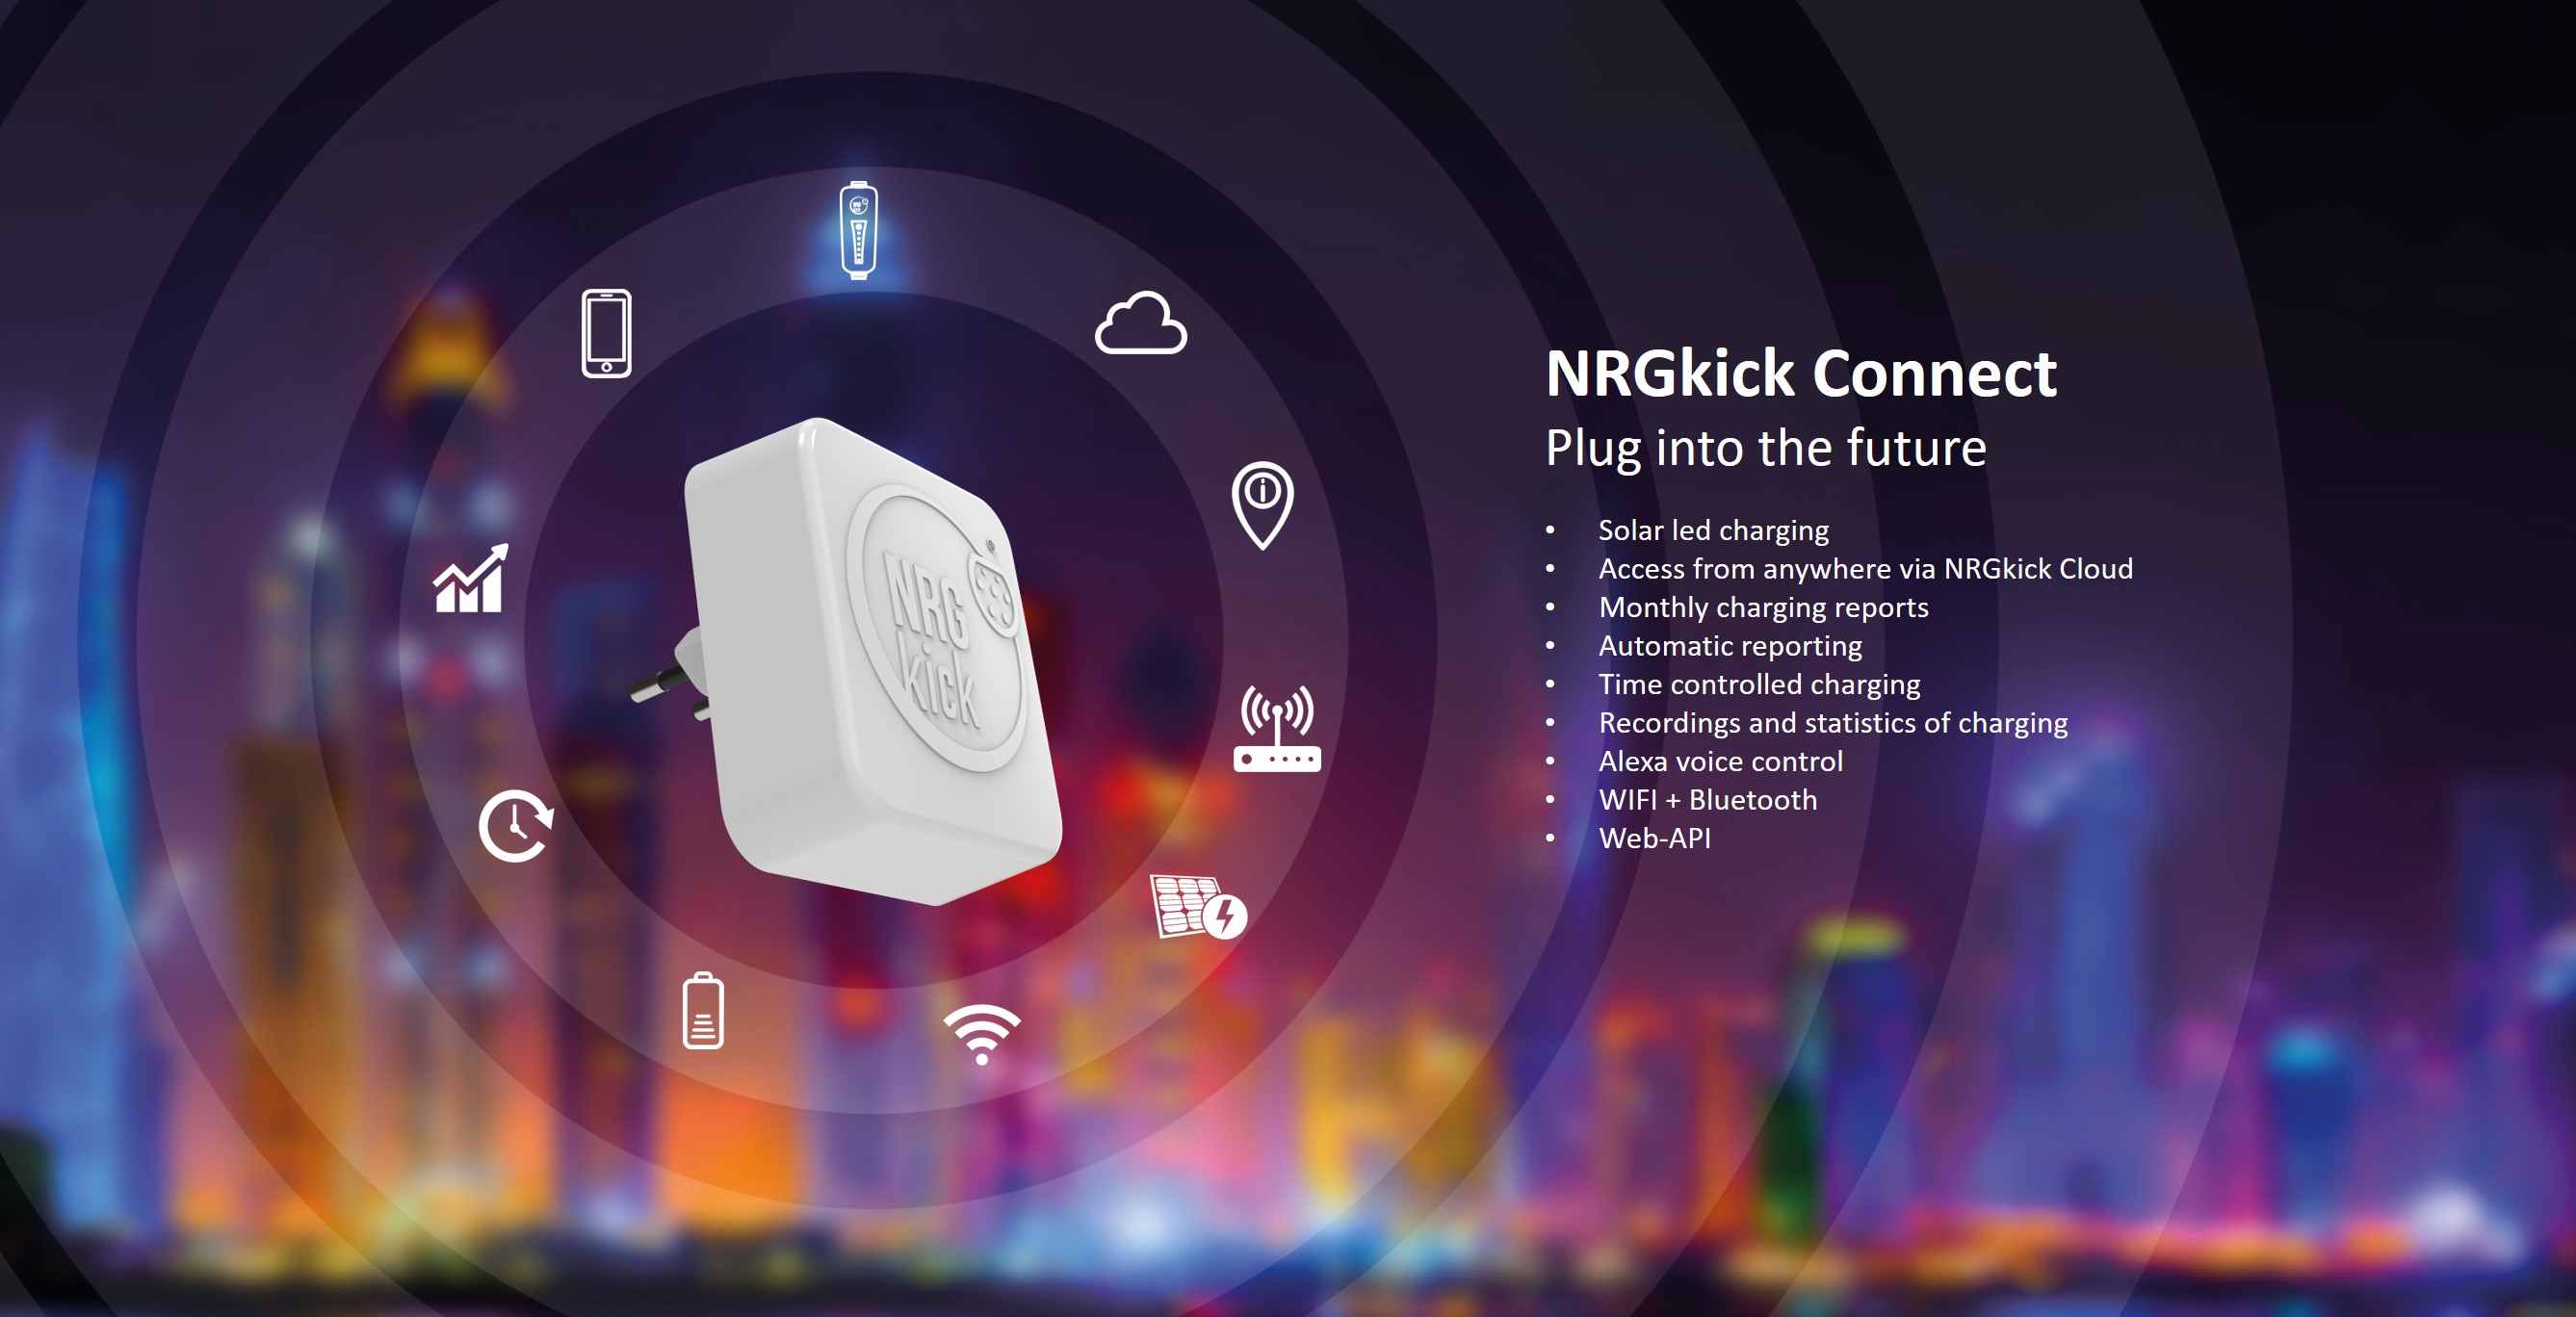 NRGkick Connect